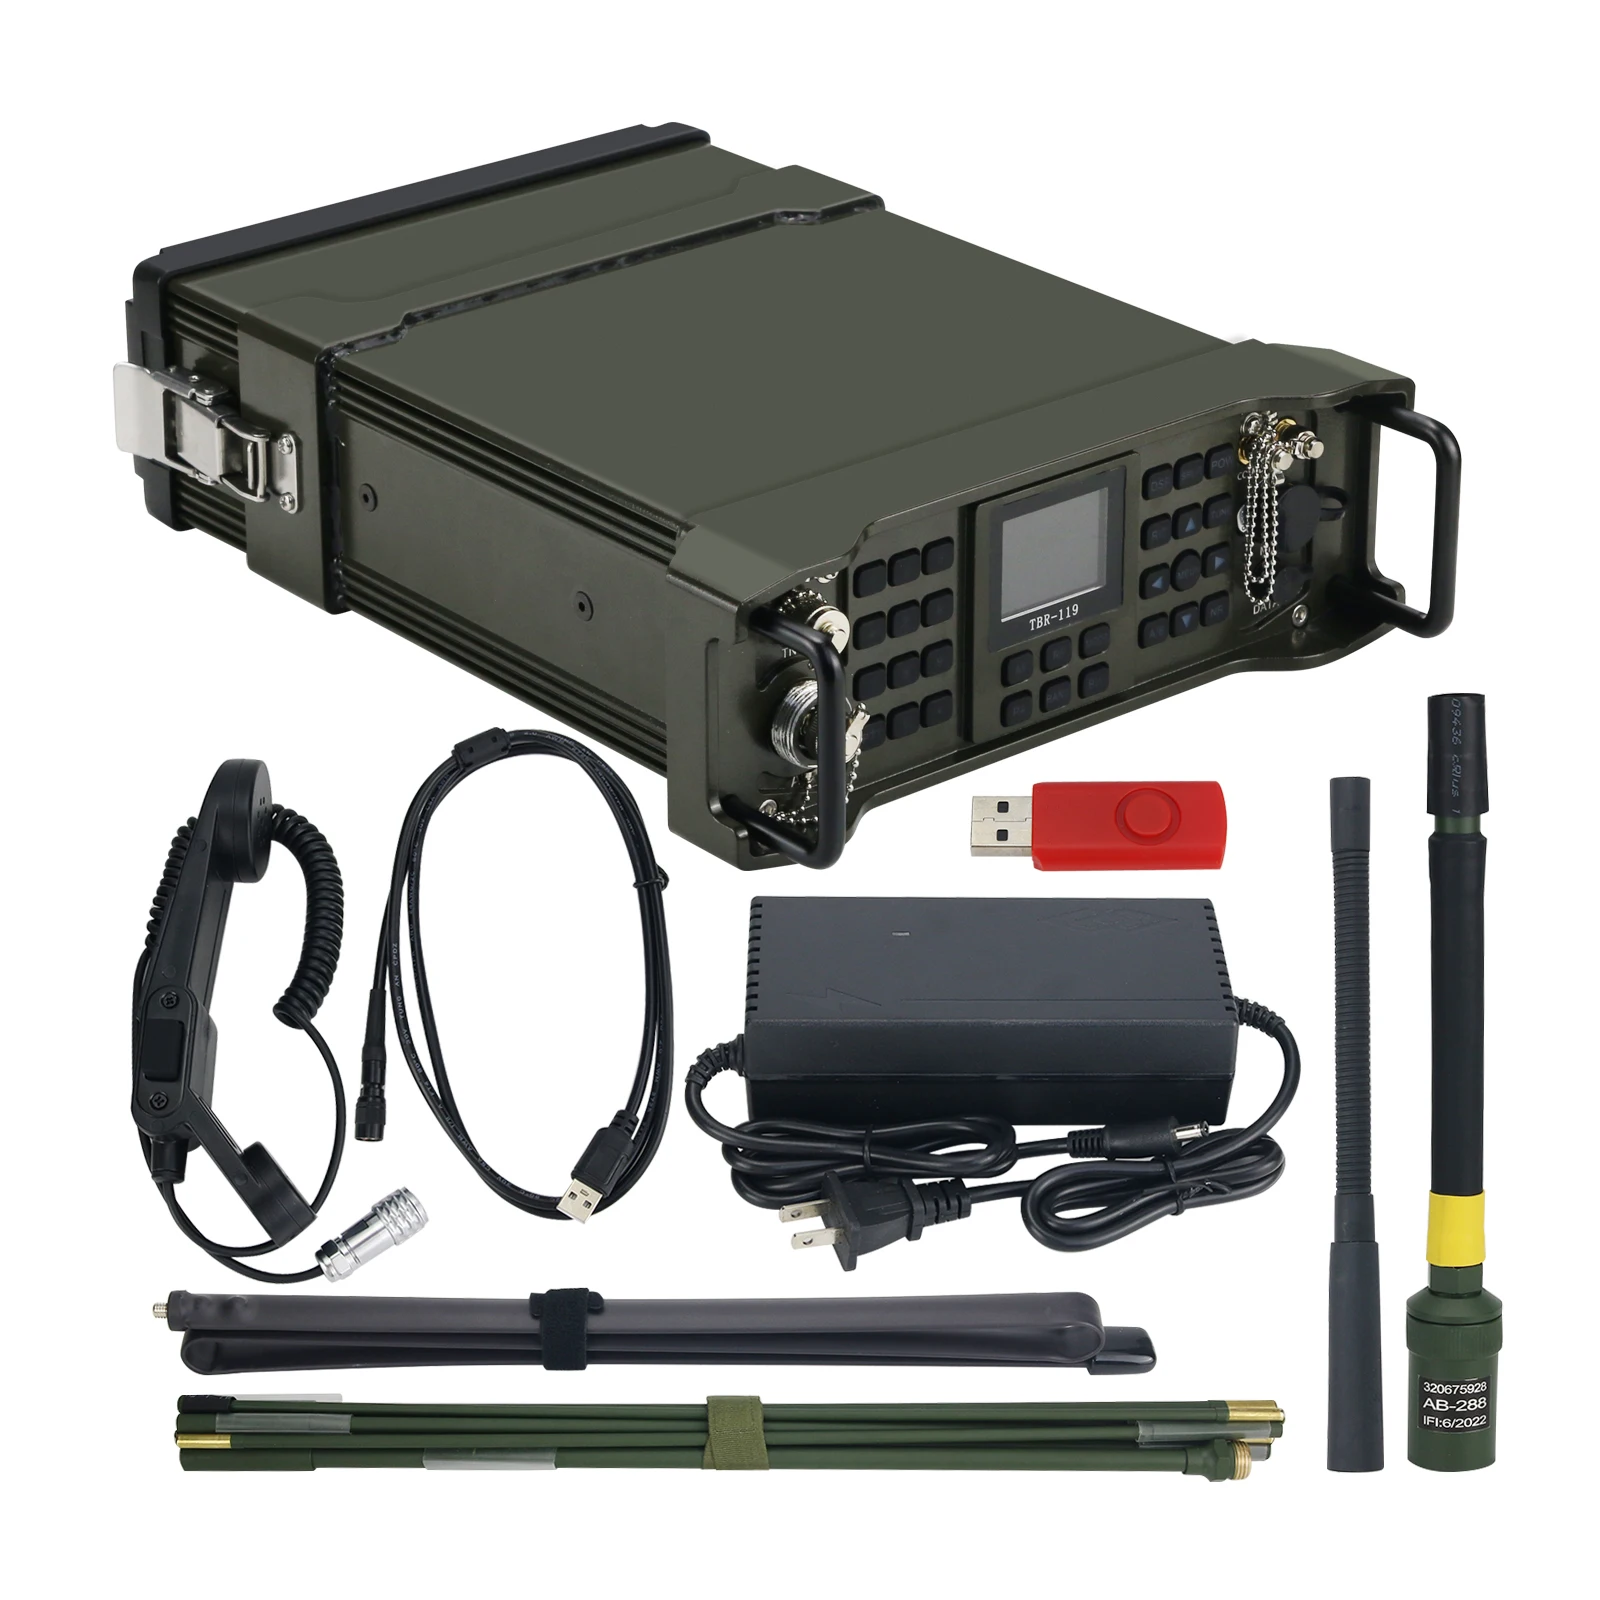 

TBR-119 Professional Full-Band Manpack Radio SDR Transceiver with GPS Module